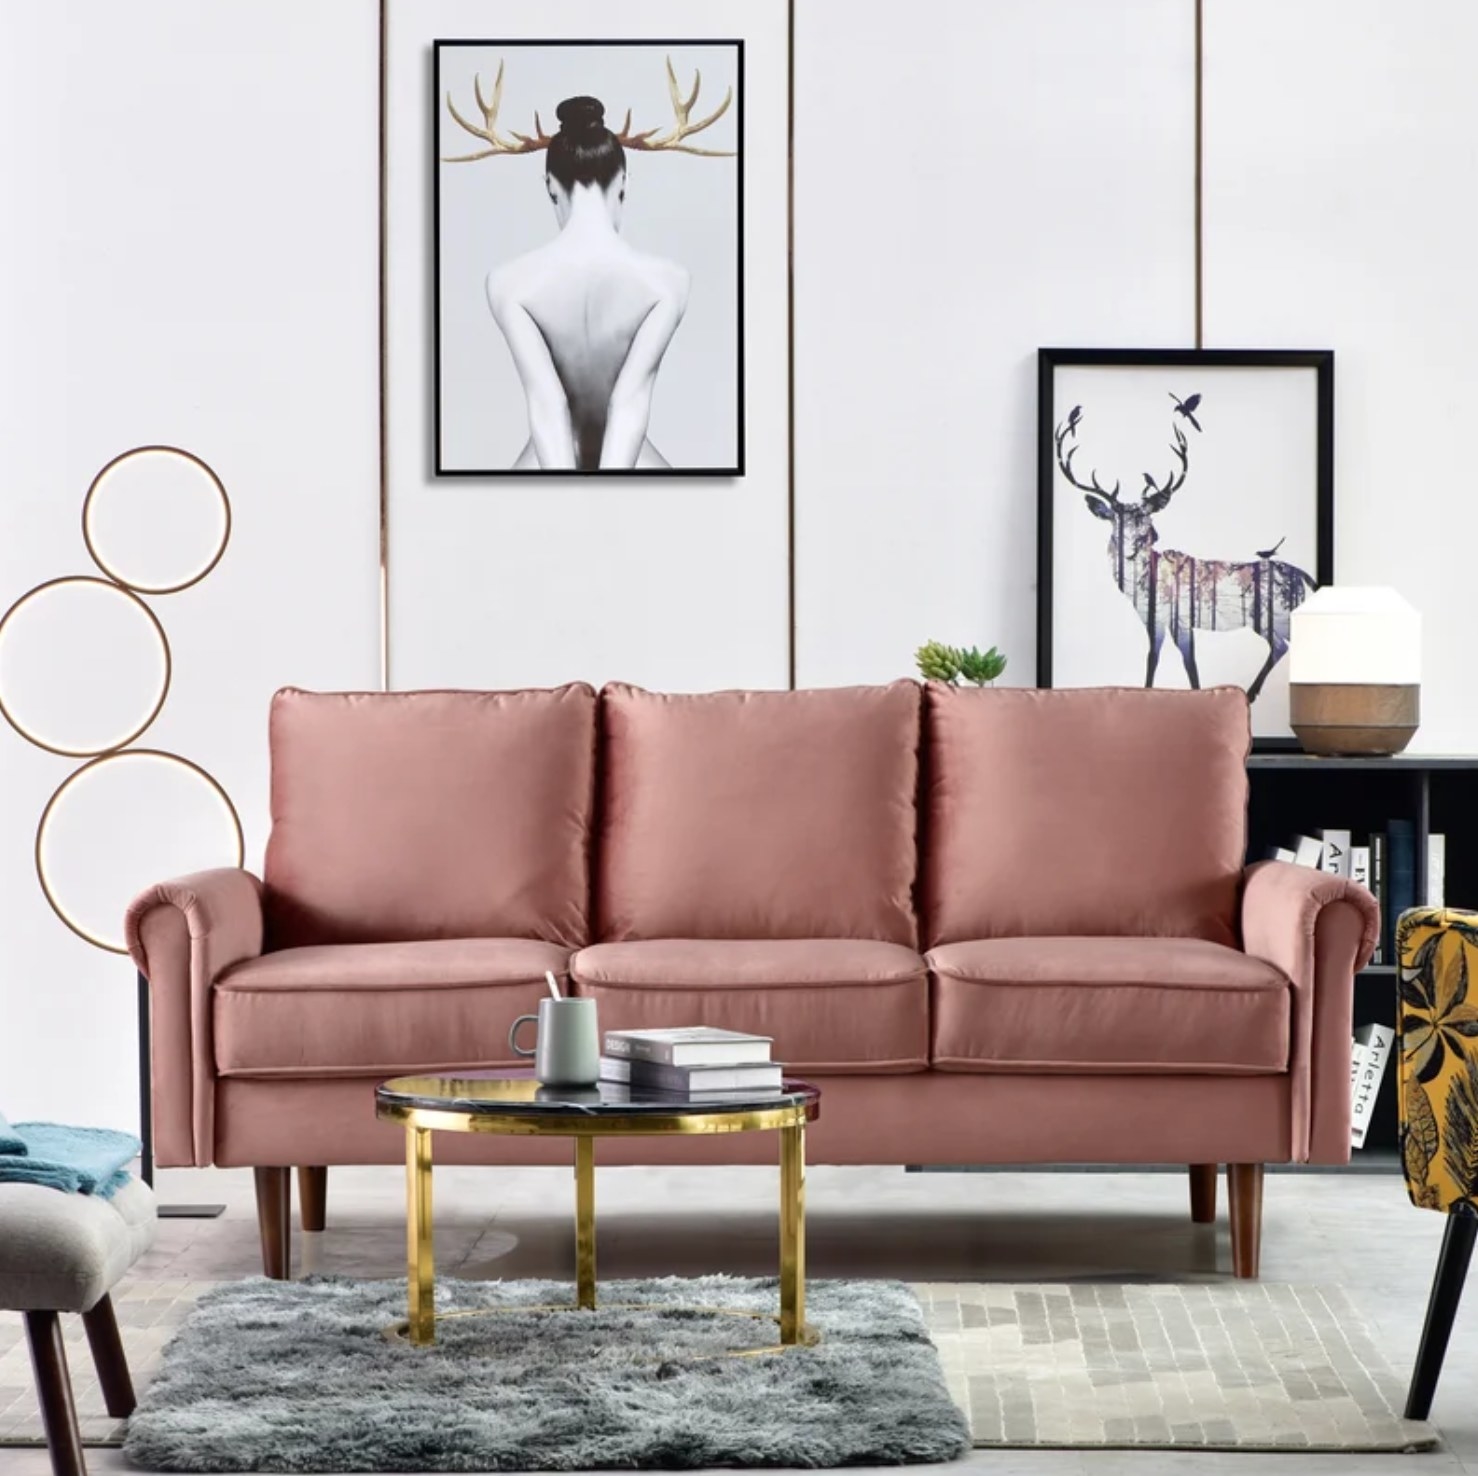 The pink sofa